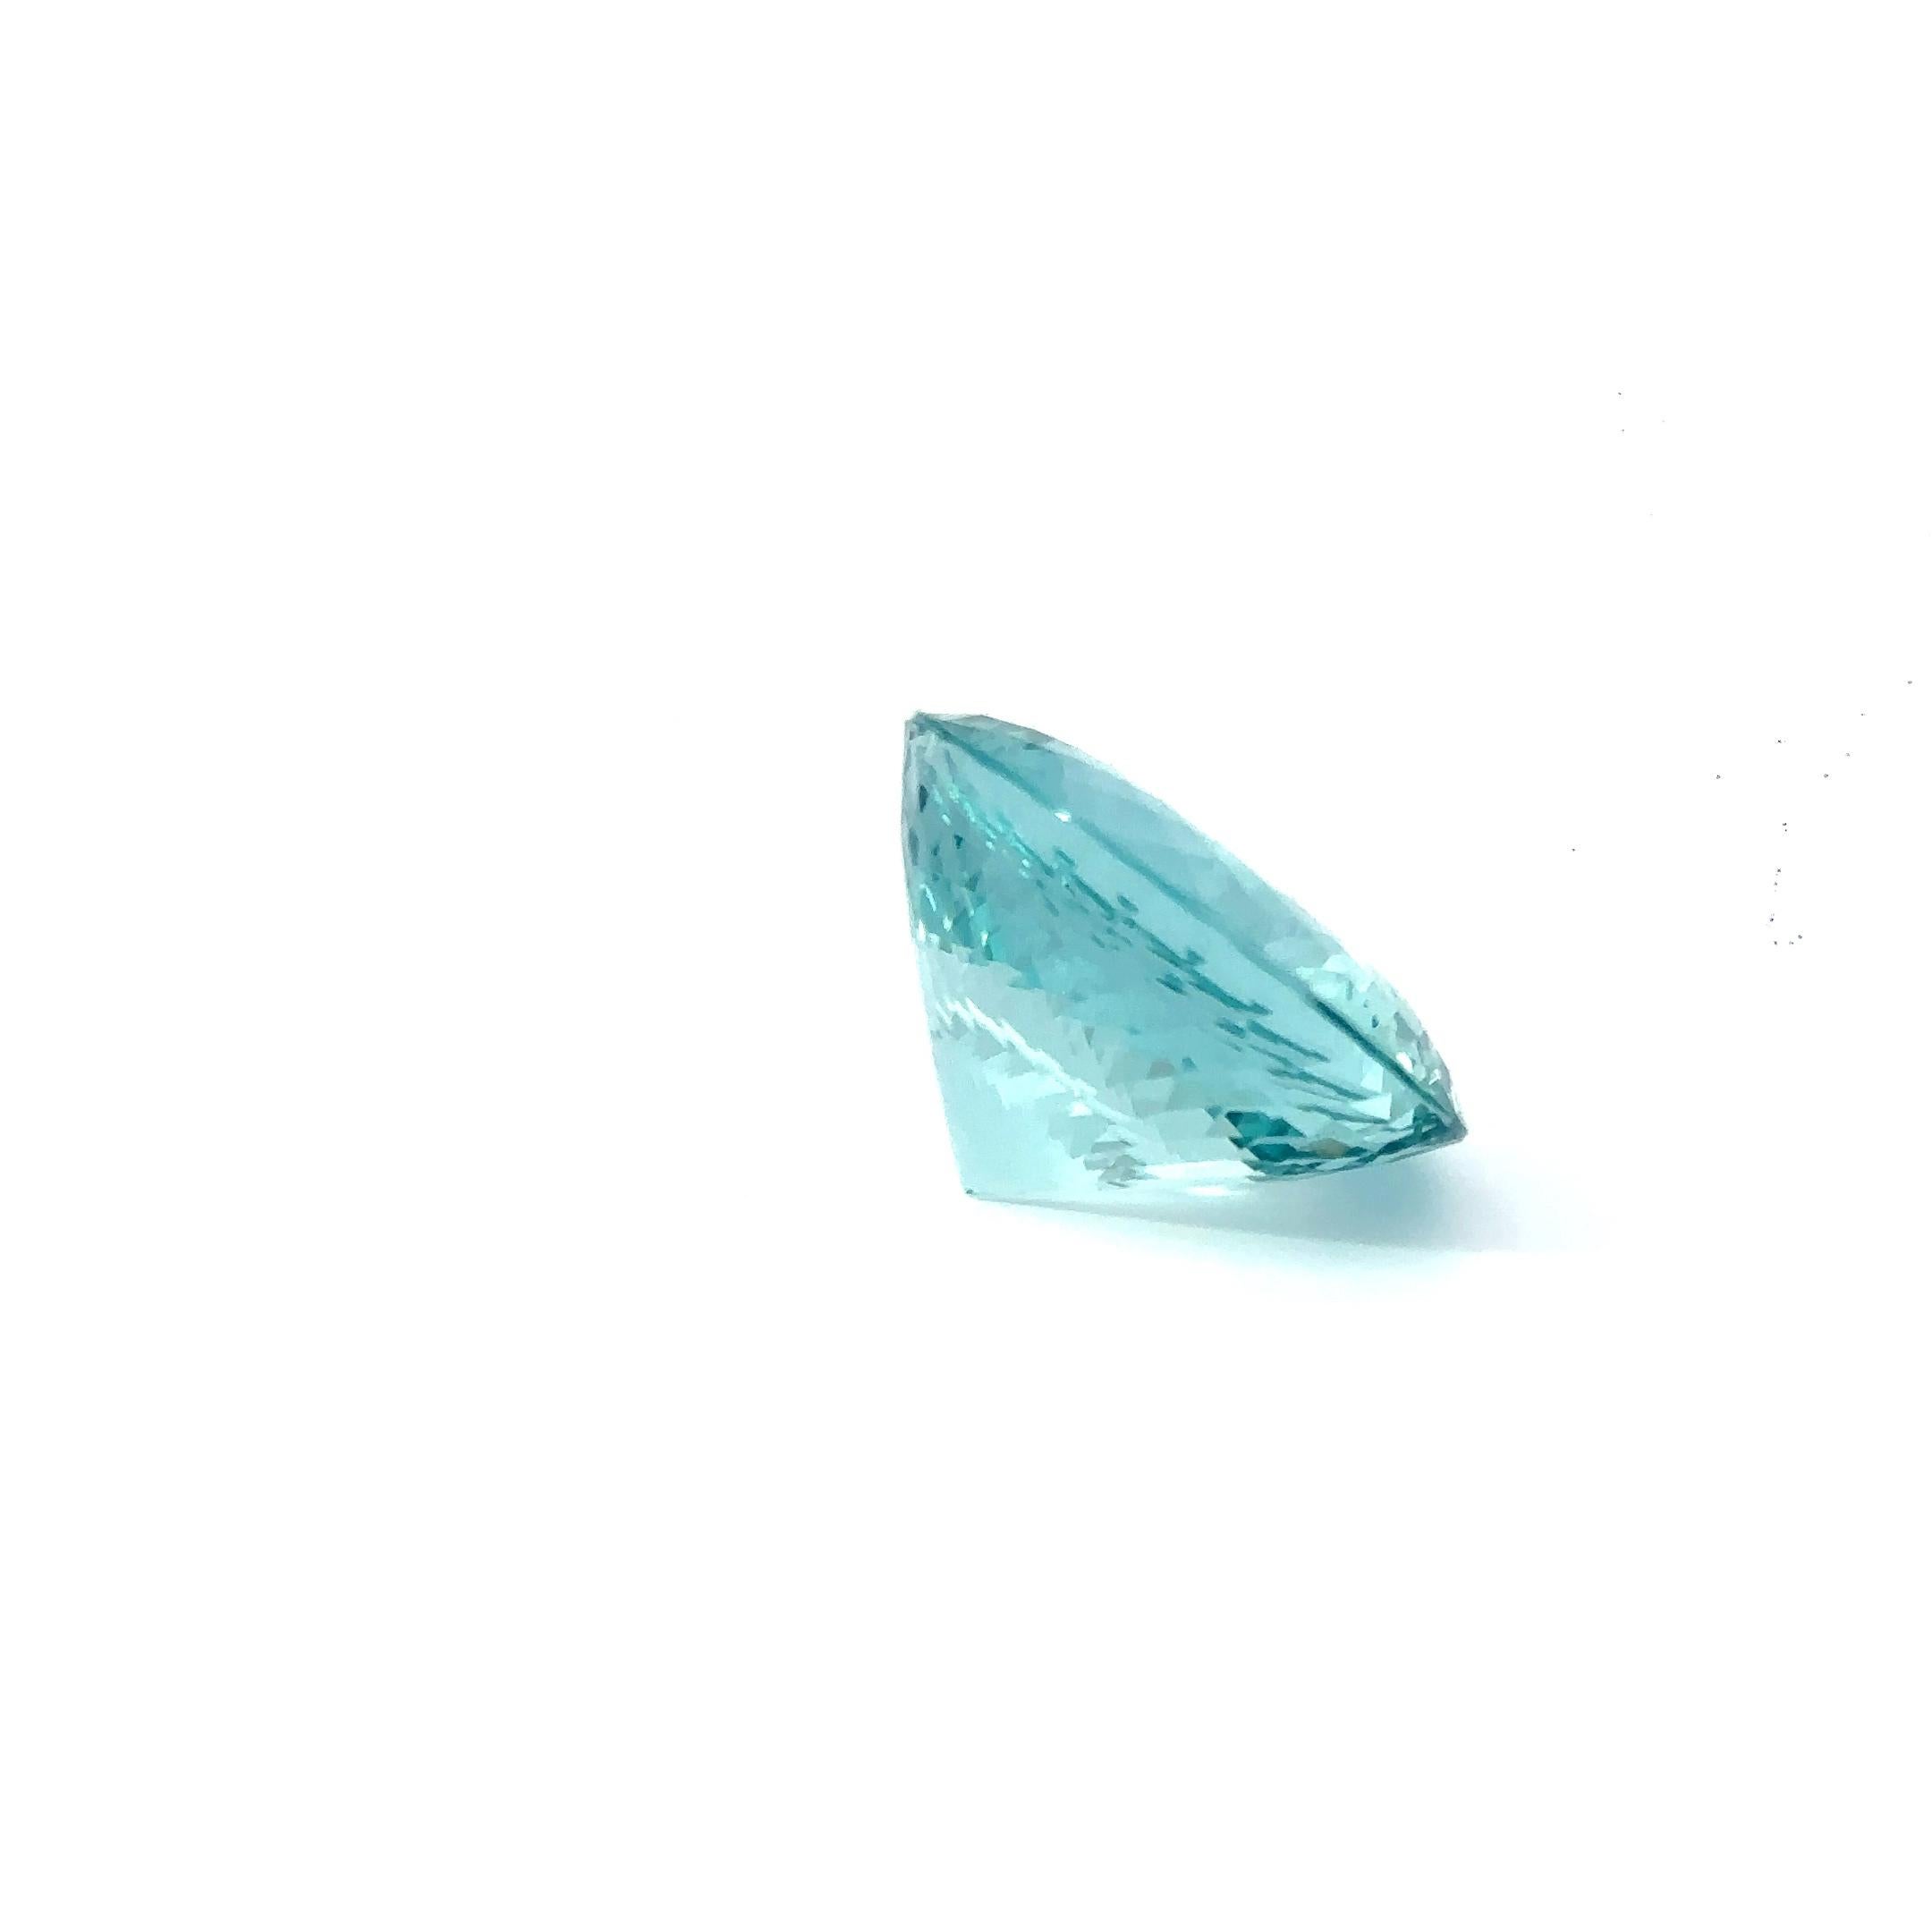 Modern CDC Certified 66.80 Carat Faceted Aquamarine For Sale